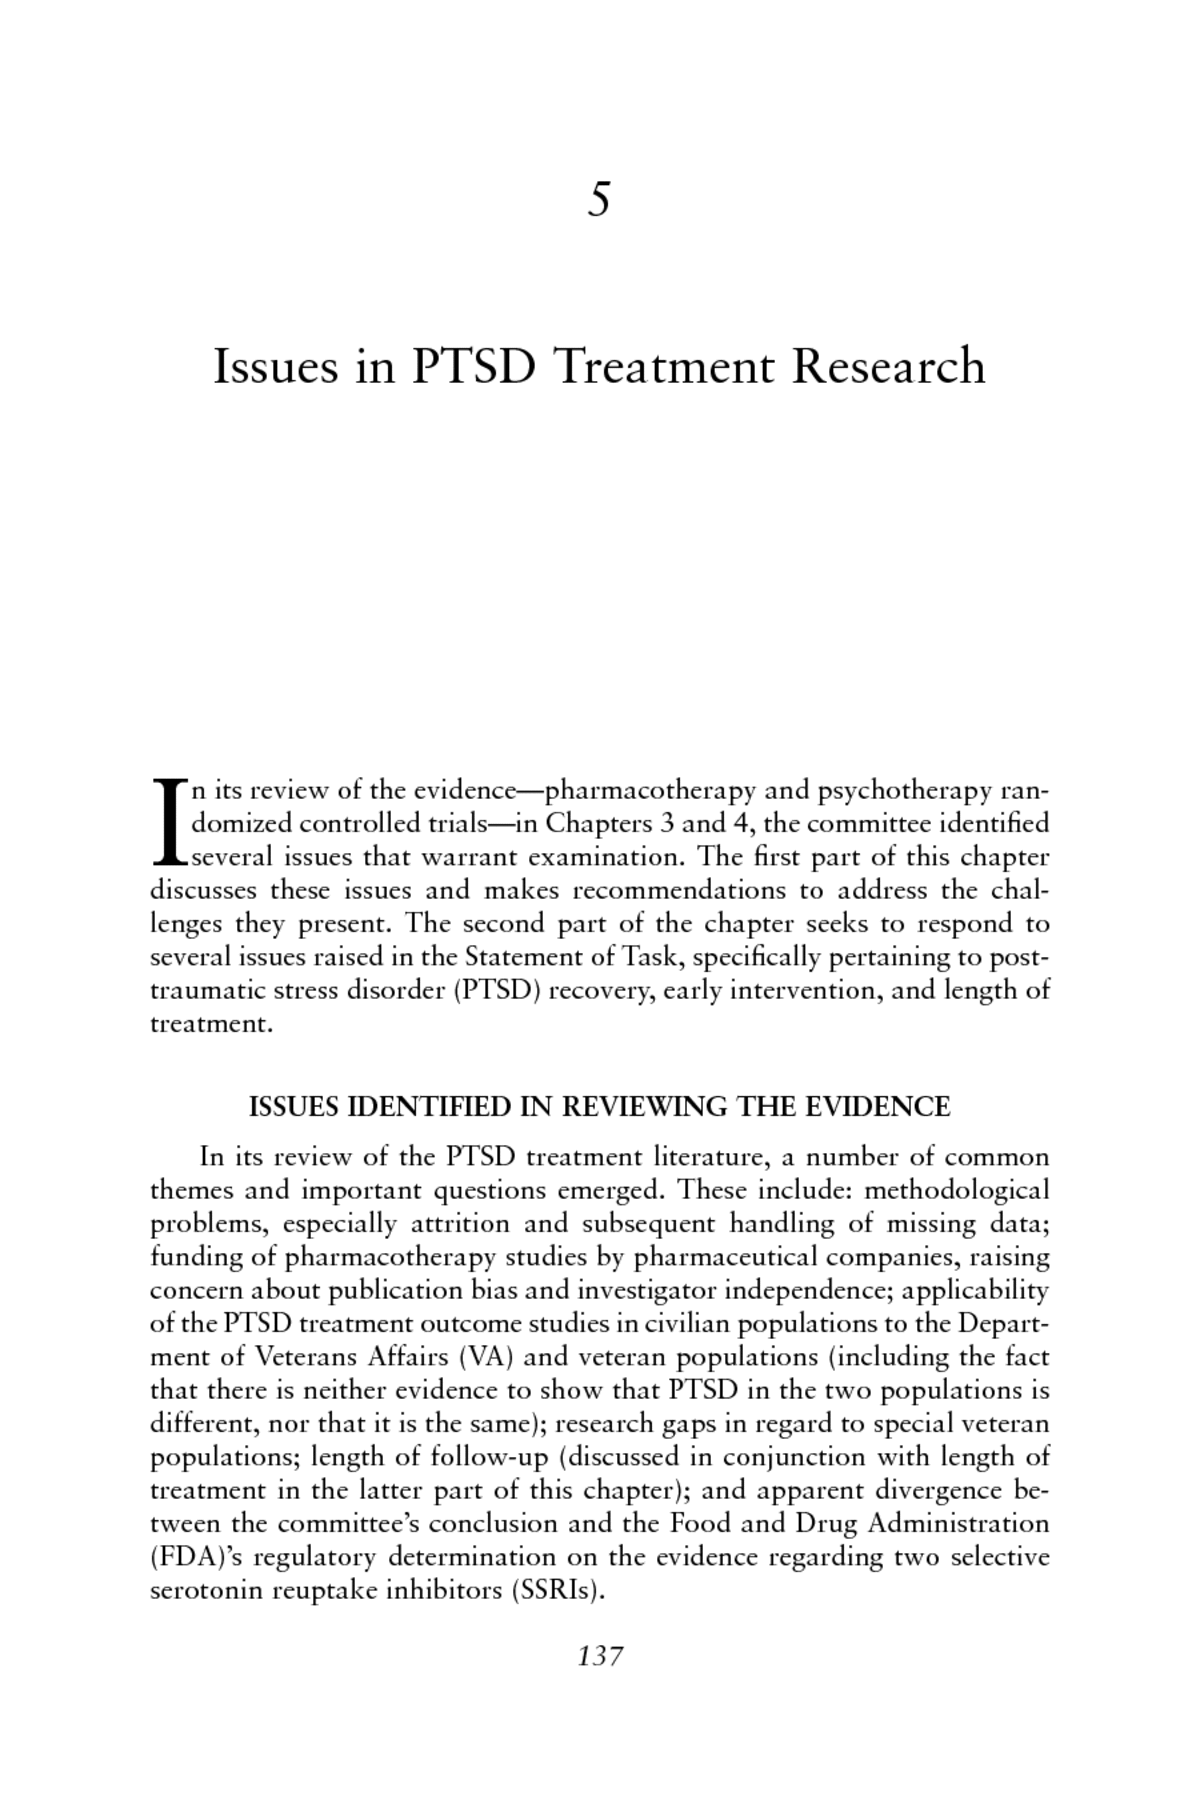 research paper on ptsd